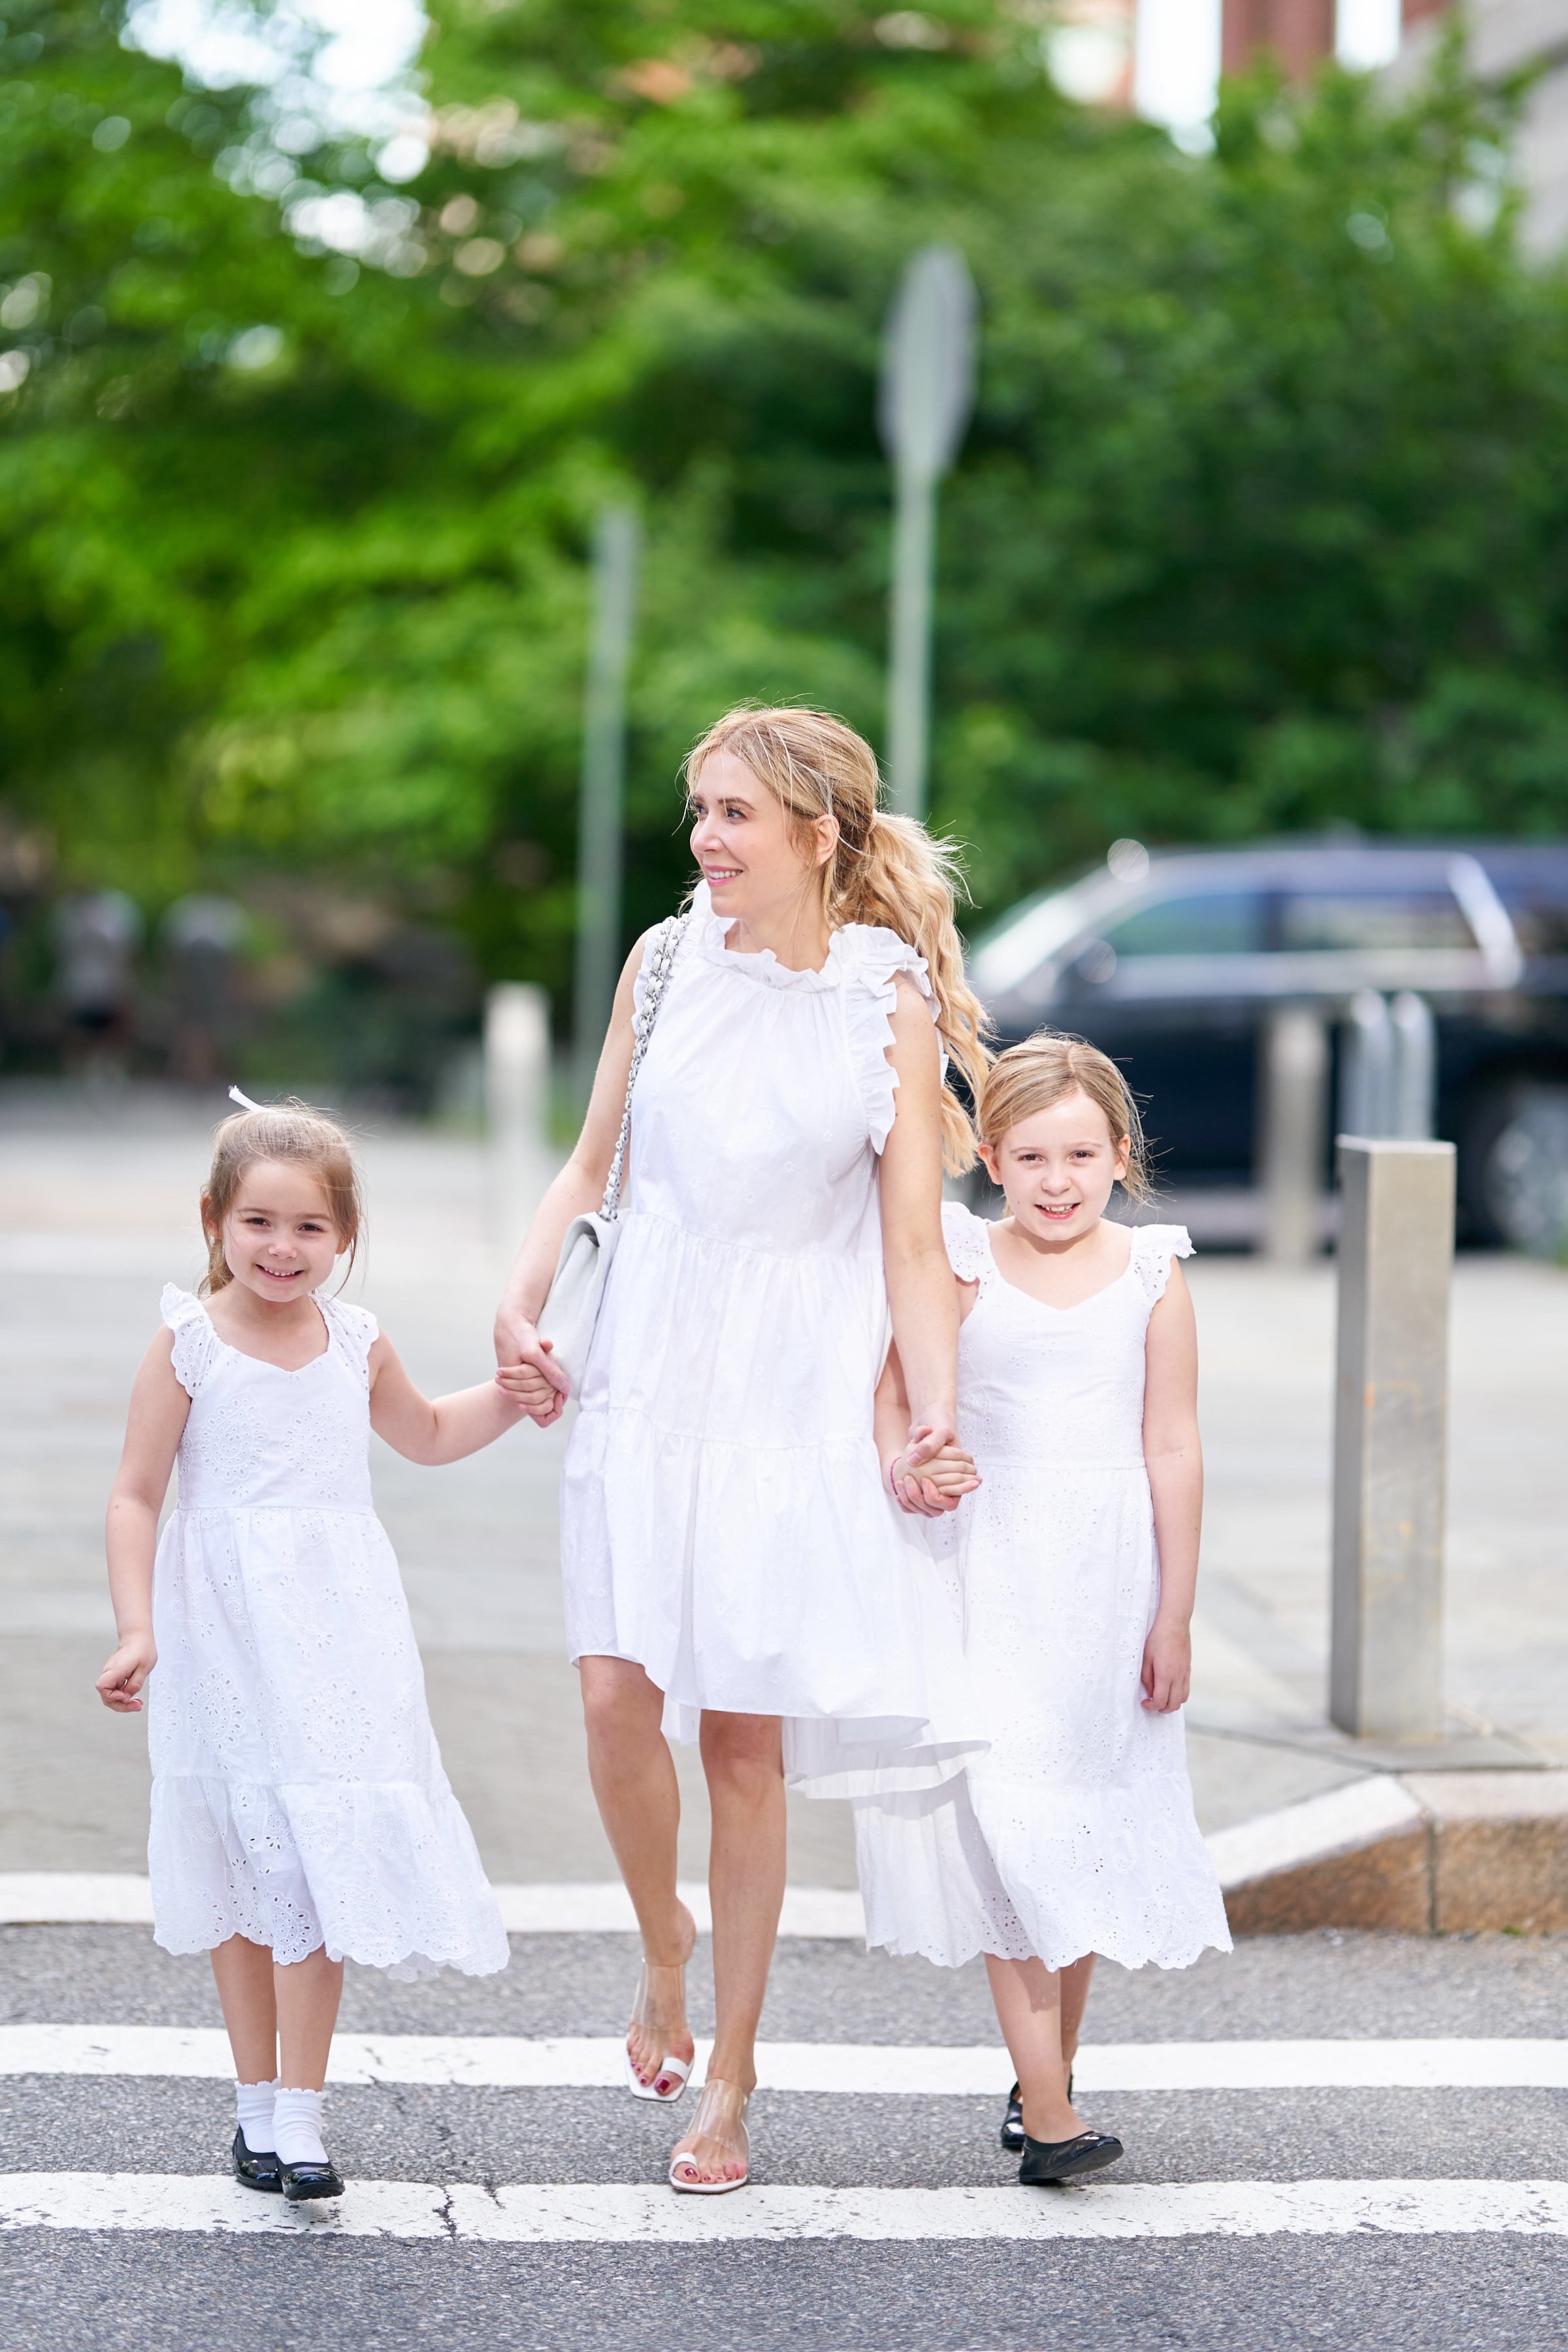 About the Outfits, Mommy daughter style, white dresses, www.abouttheoutfits.com